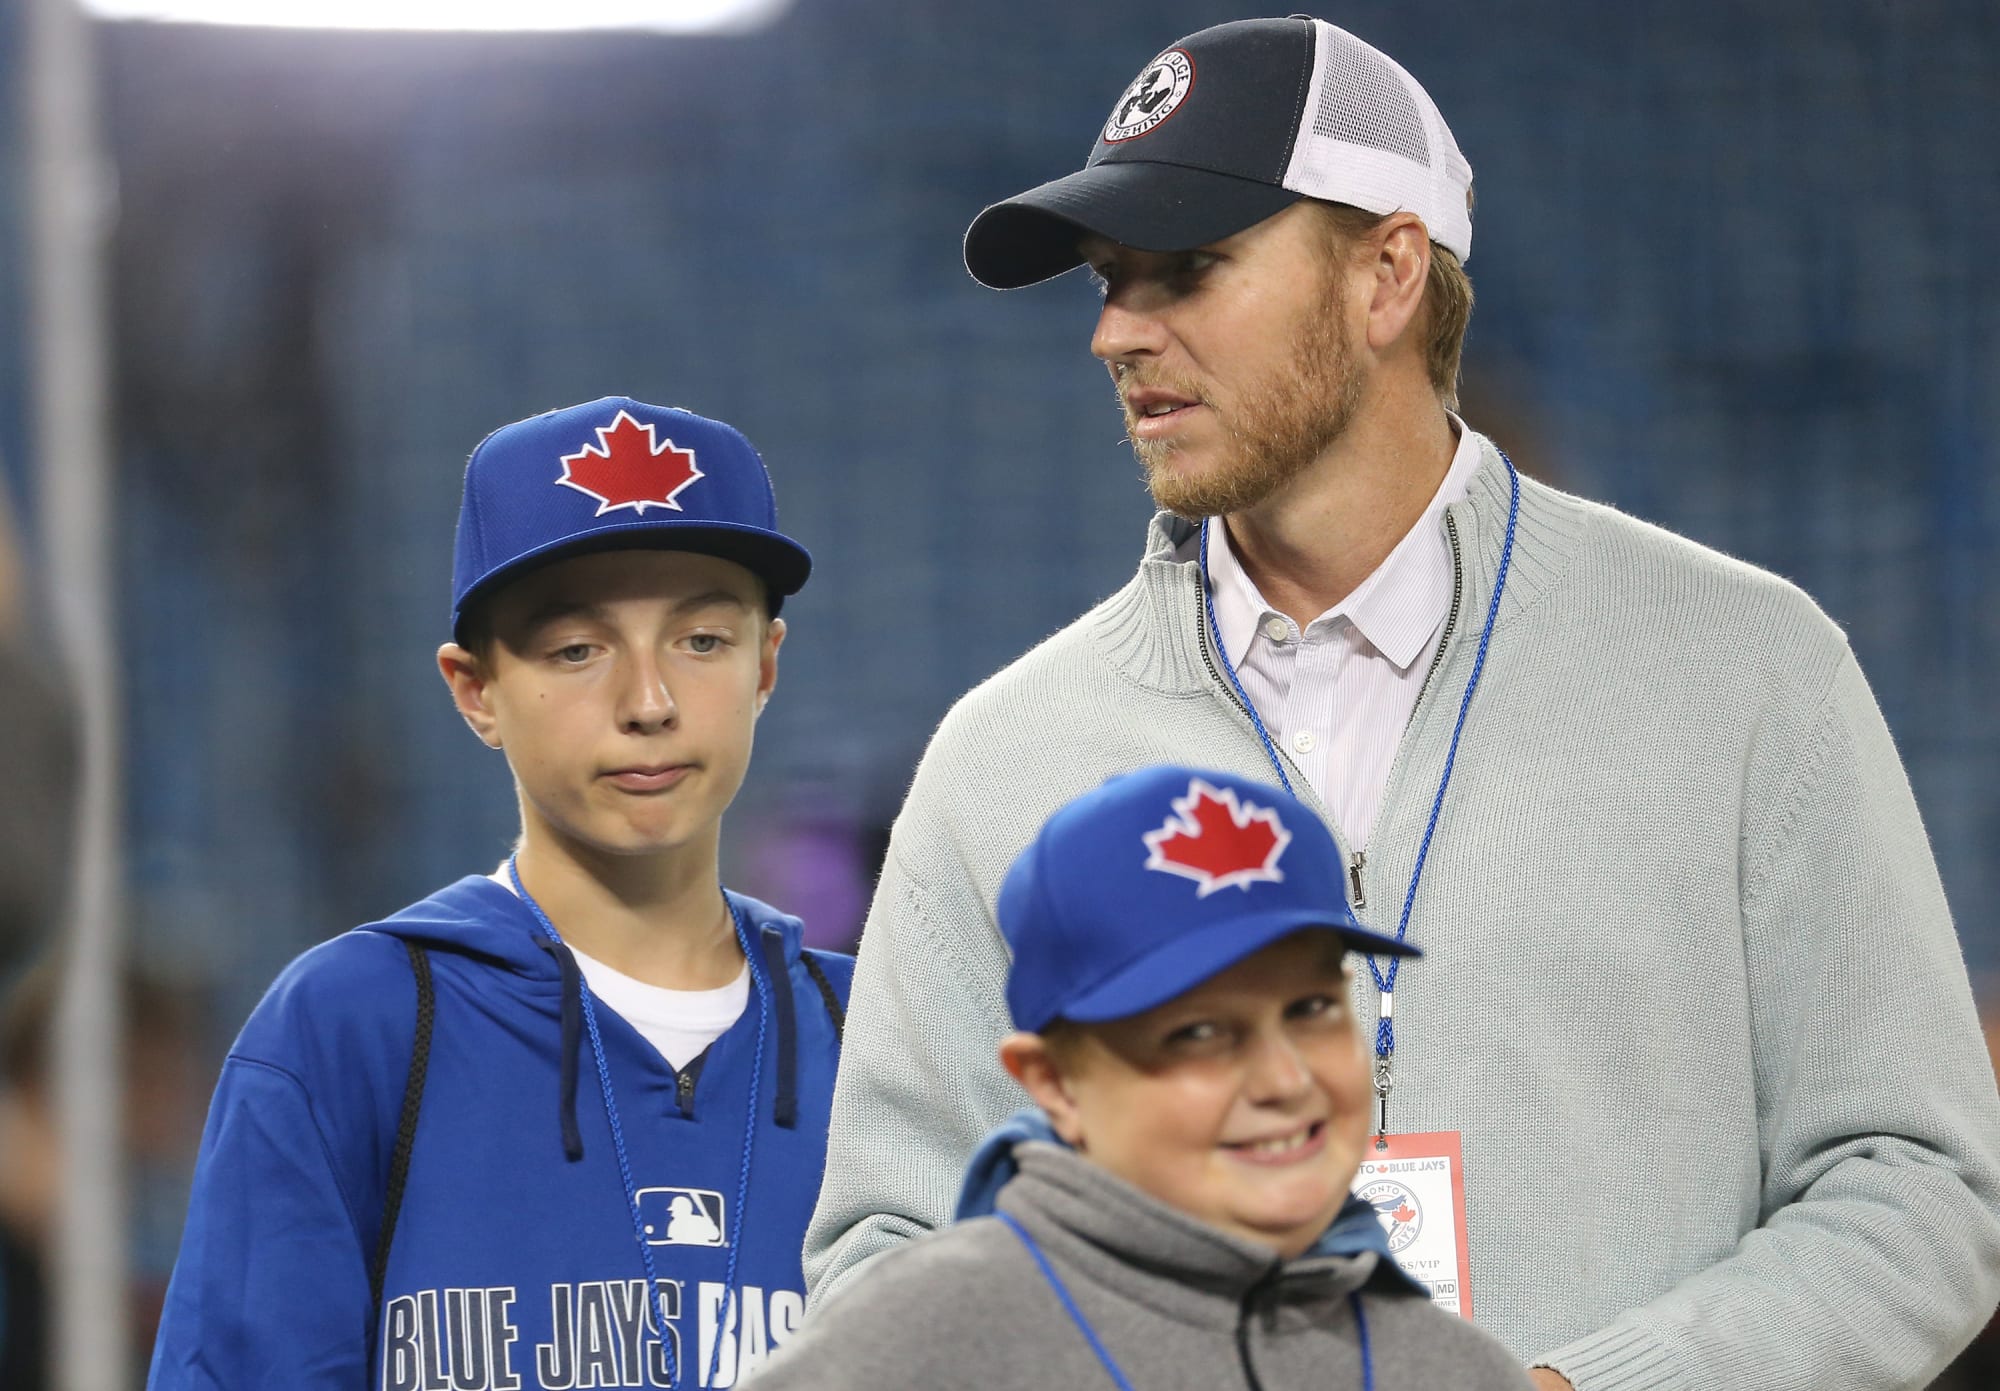 Braden Halladay Pitches Inning Against Late Father's Team 